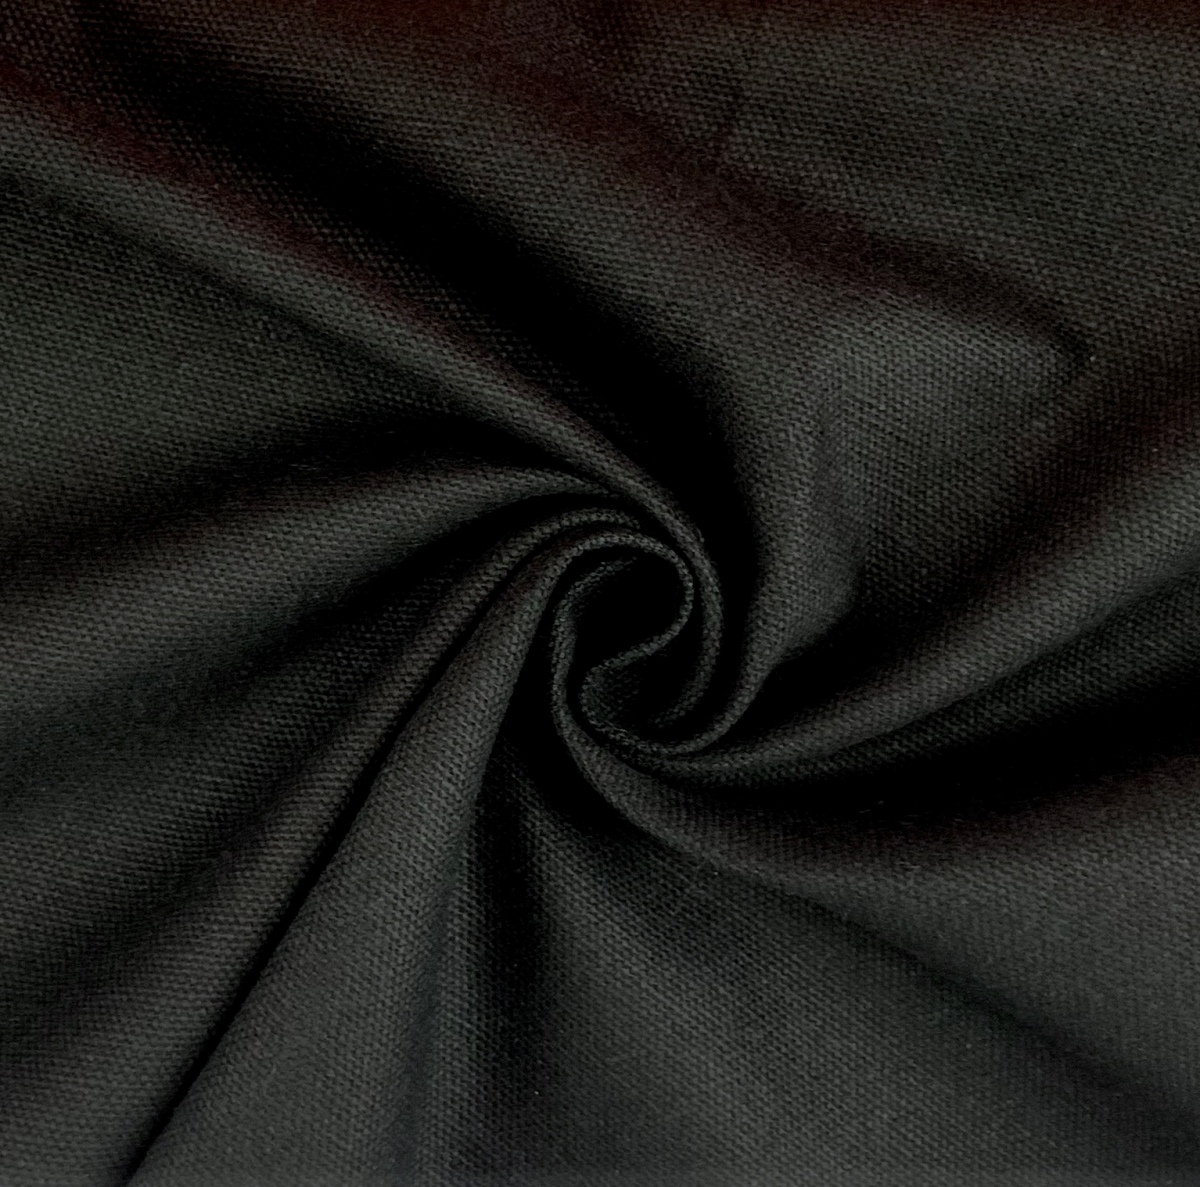 https://www.croftmill.fr/images/pictures/scans-of-fabric/00-2020/09-september-2020/black-cotton-canvas-fold.jpg?v=12c5222e